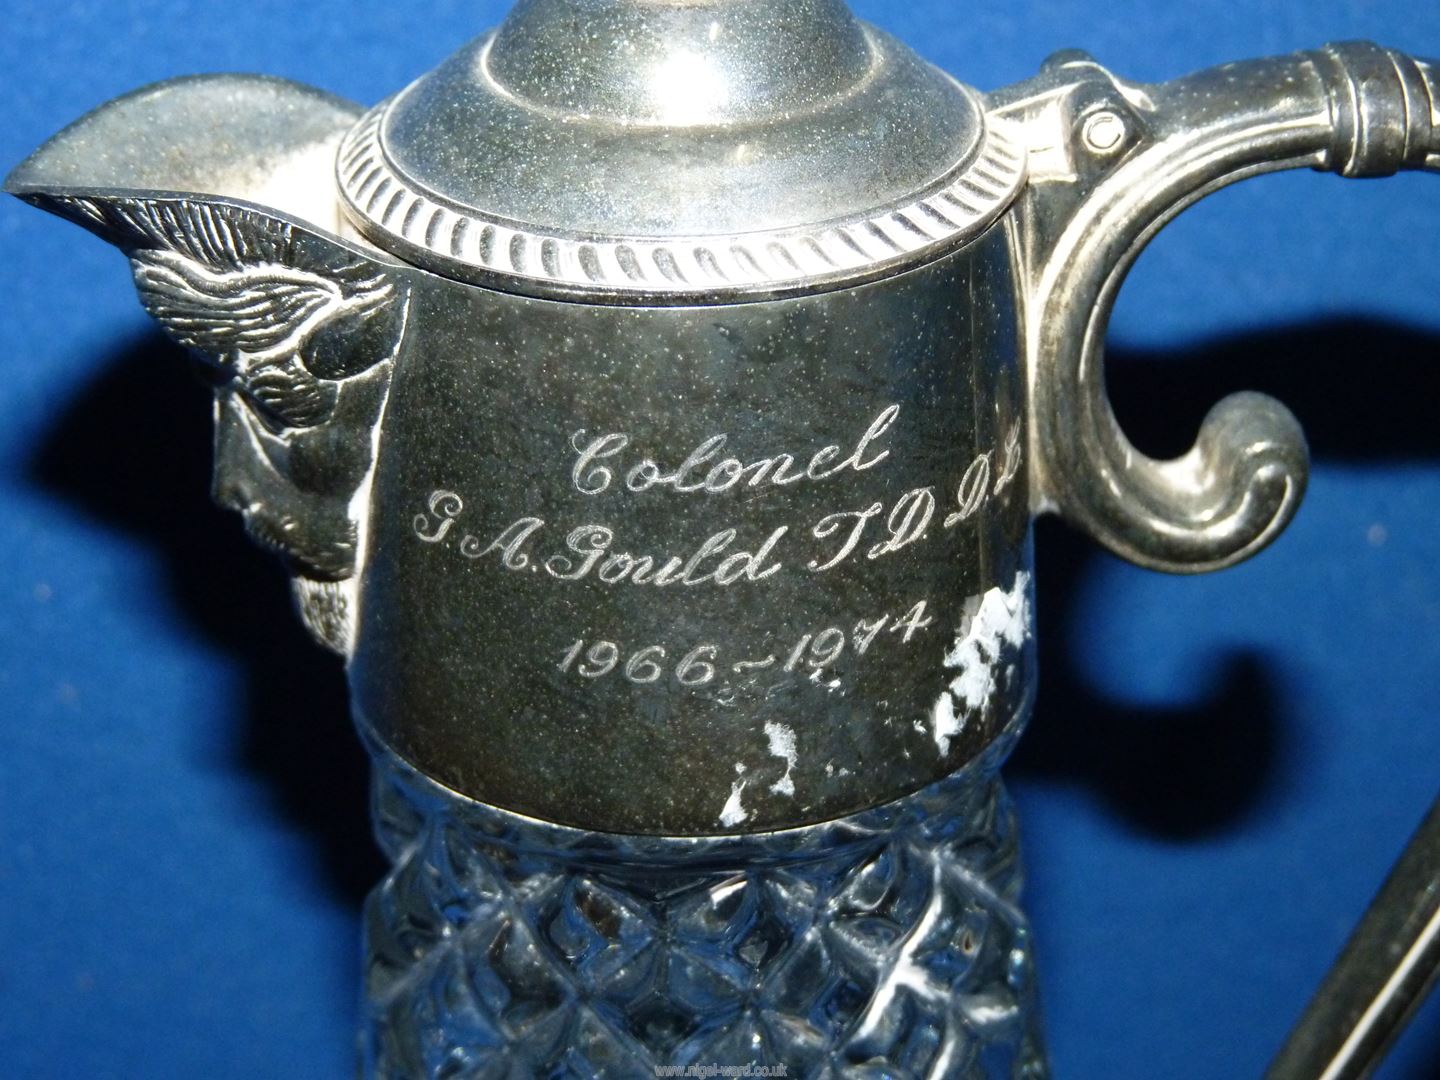 A silver plated tray, tankard, claret jug for G.A. Gould in various ranks including Colonel. - Image 4 of 5